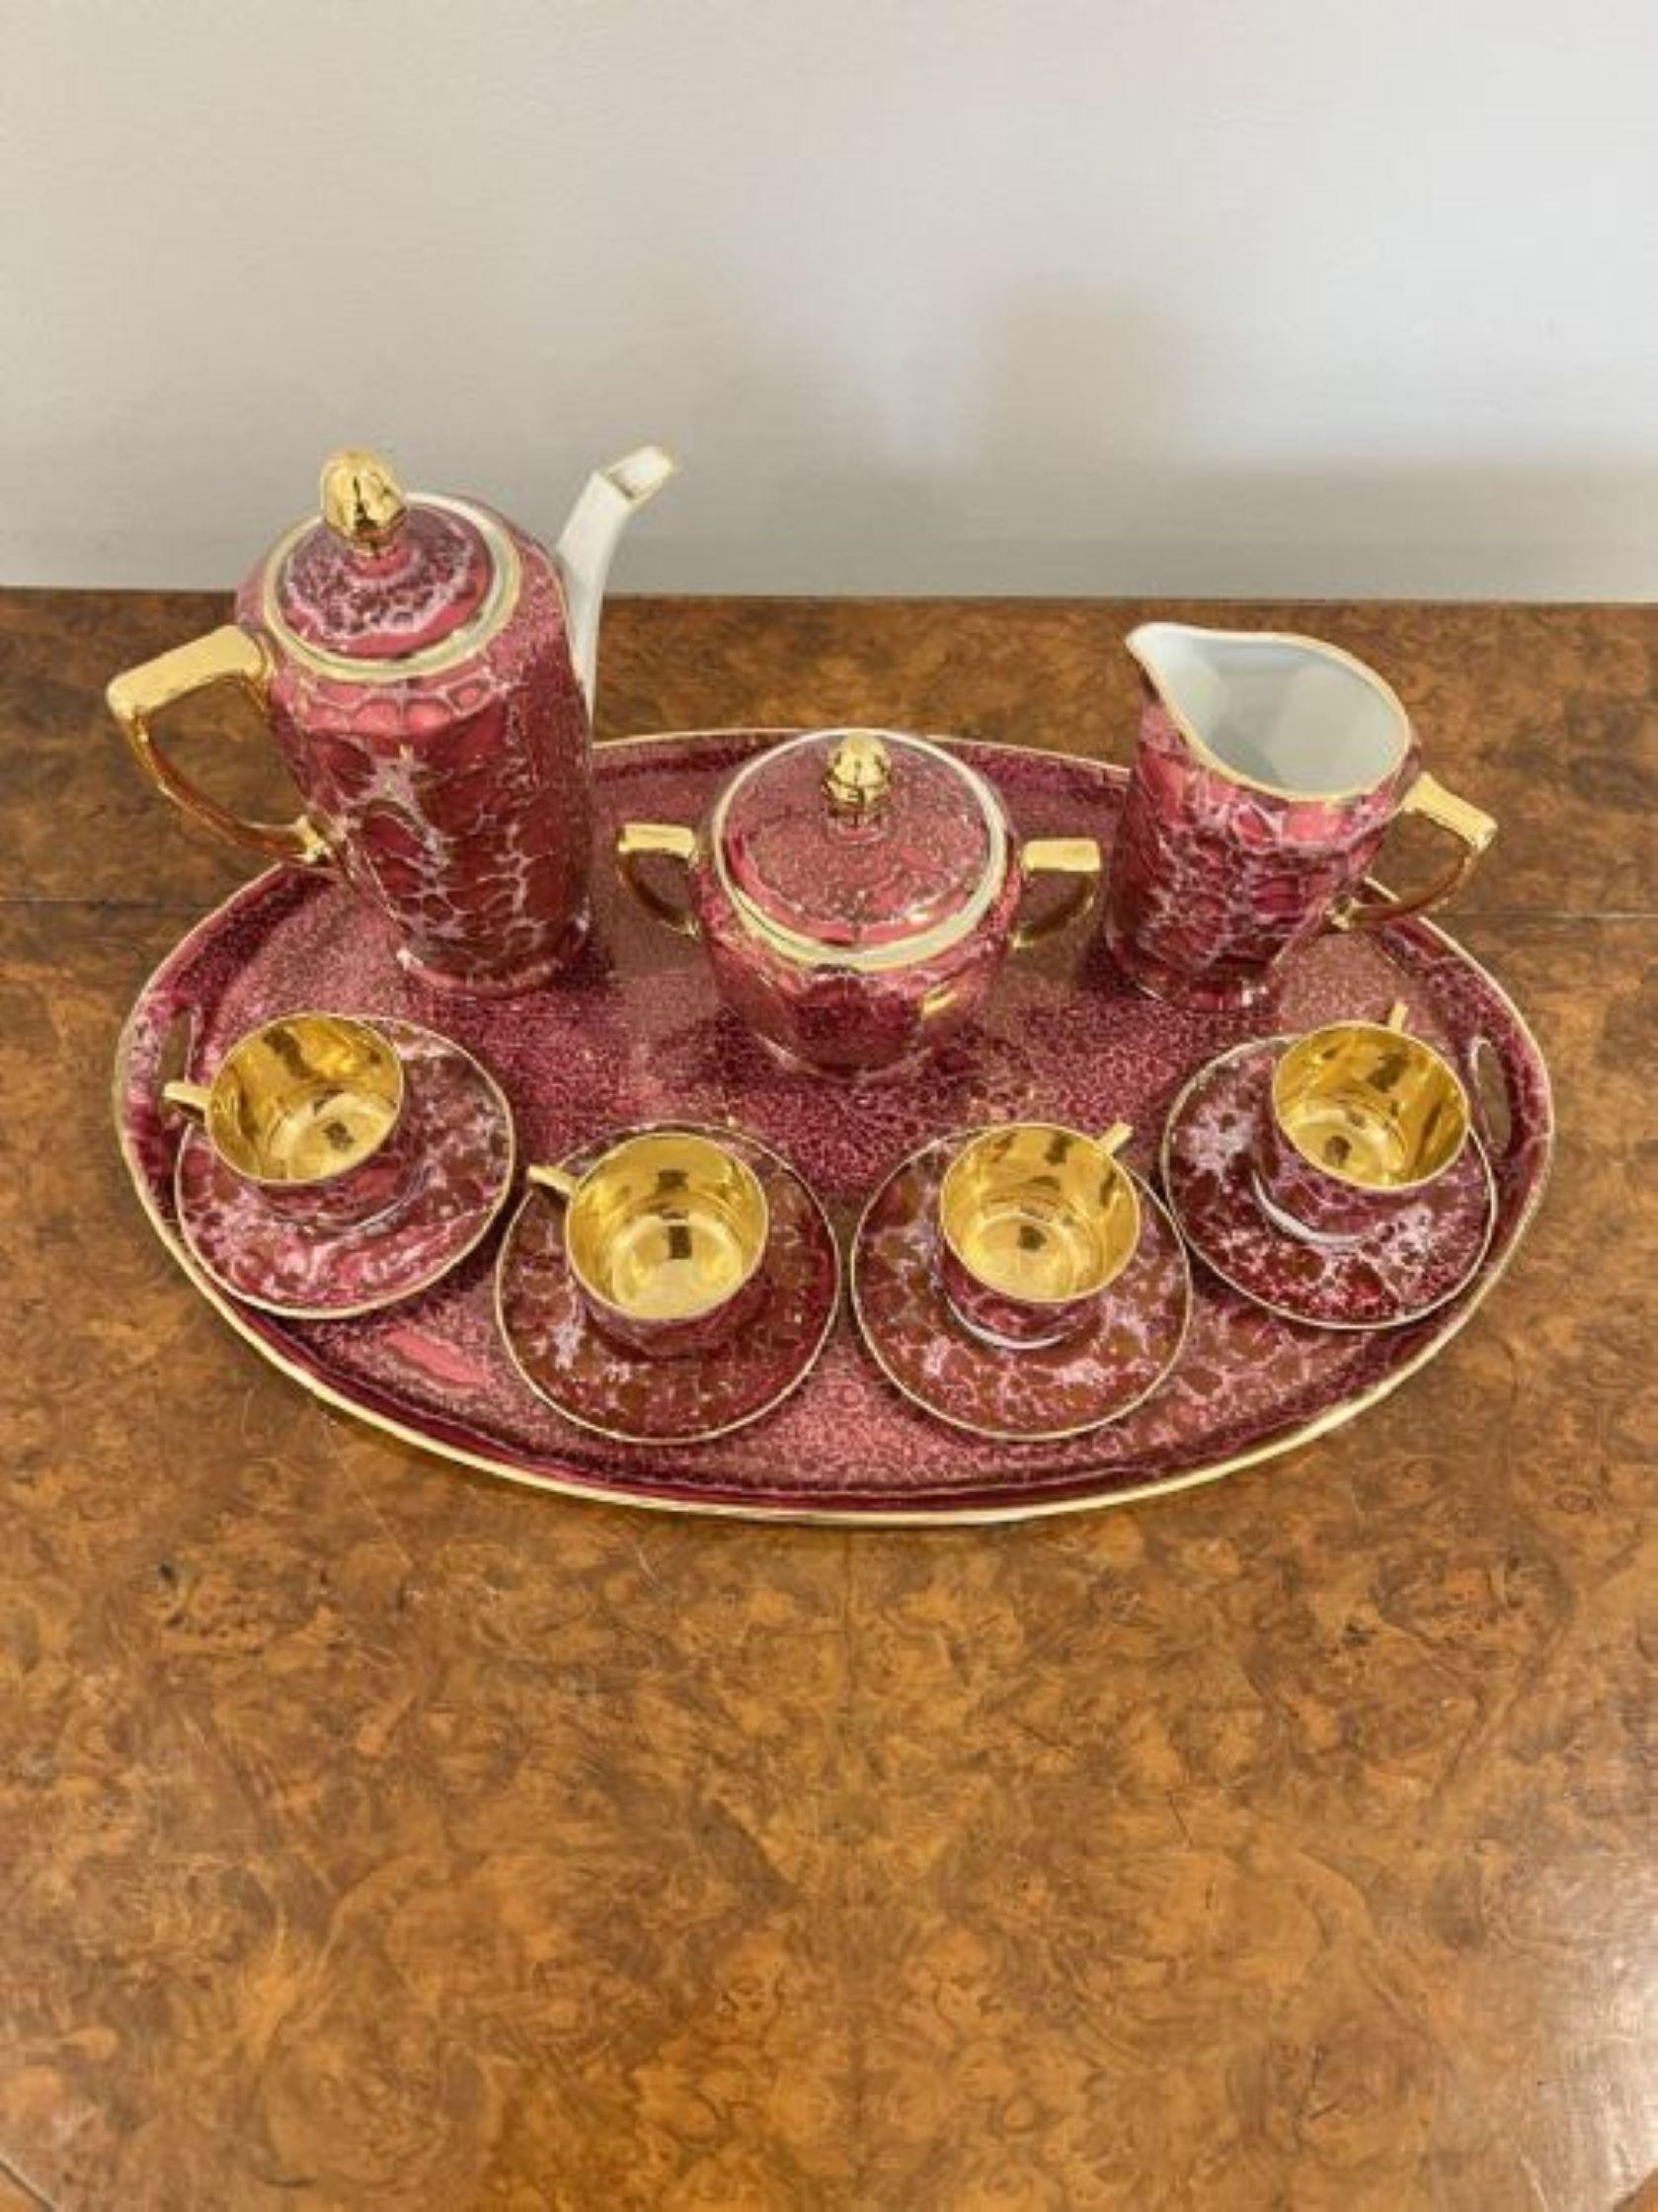 Quality antique porcelain coffee set consisting of an oval tray, four coffee cups and saucers, a coffee pot, cream jug and sugar bowl in wonderful pink and gold colours 